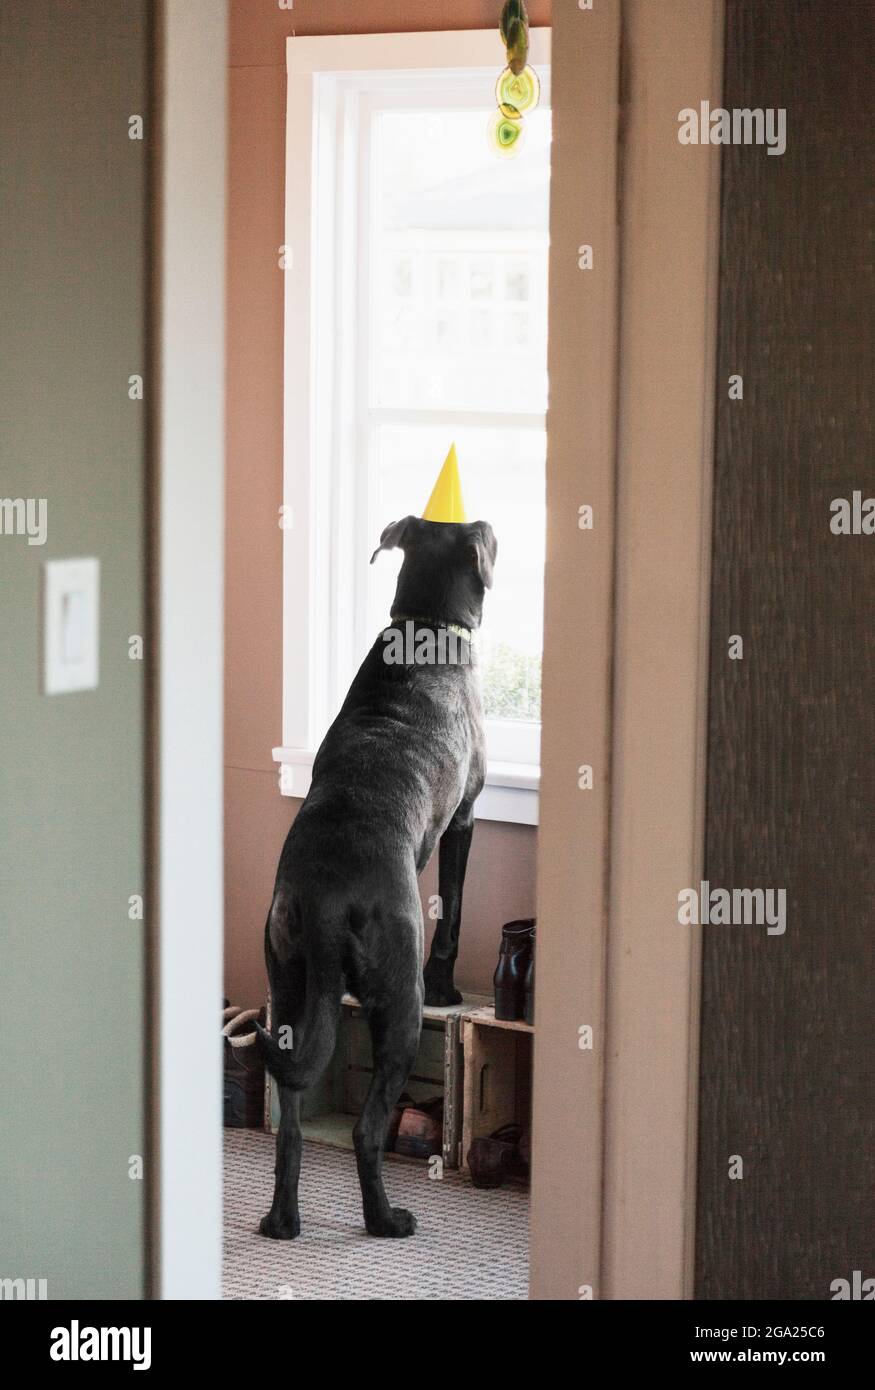 Dog waiting for birthday party to arrive. Stock Photo